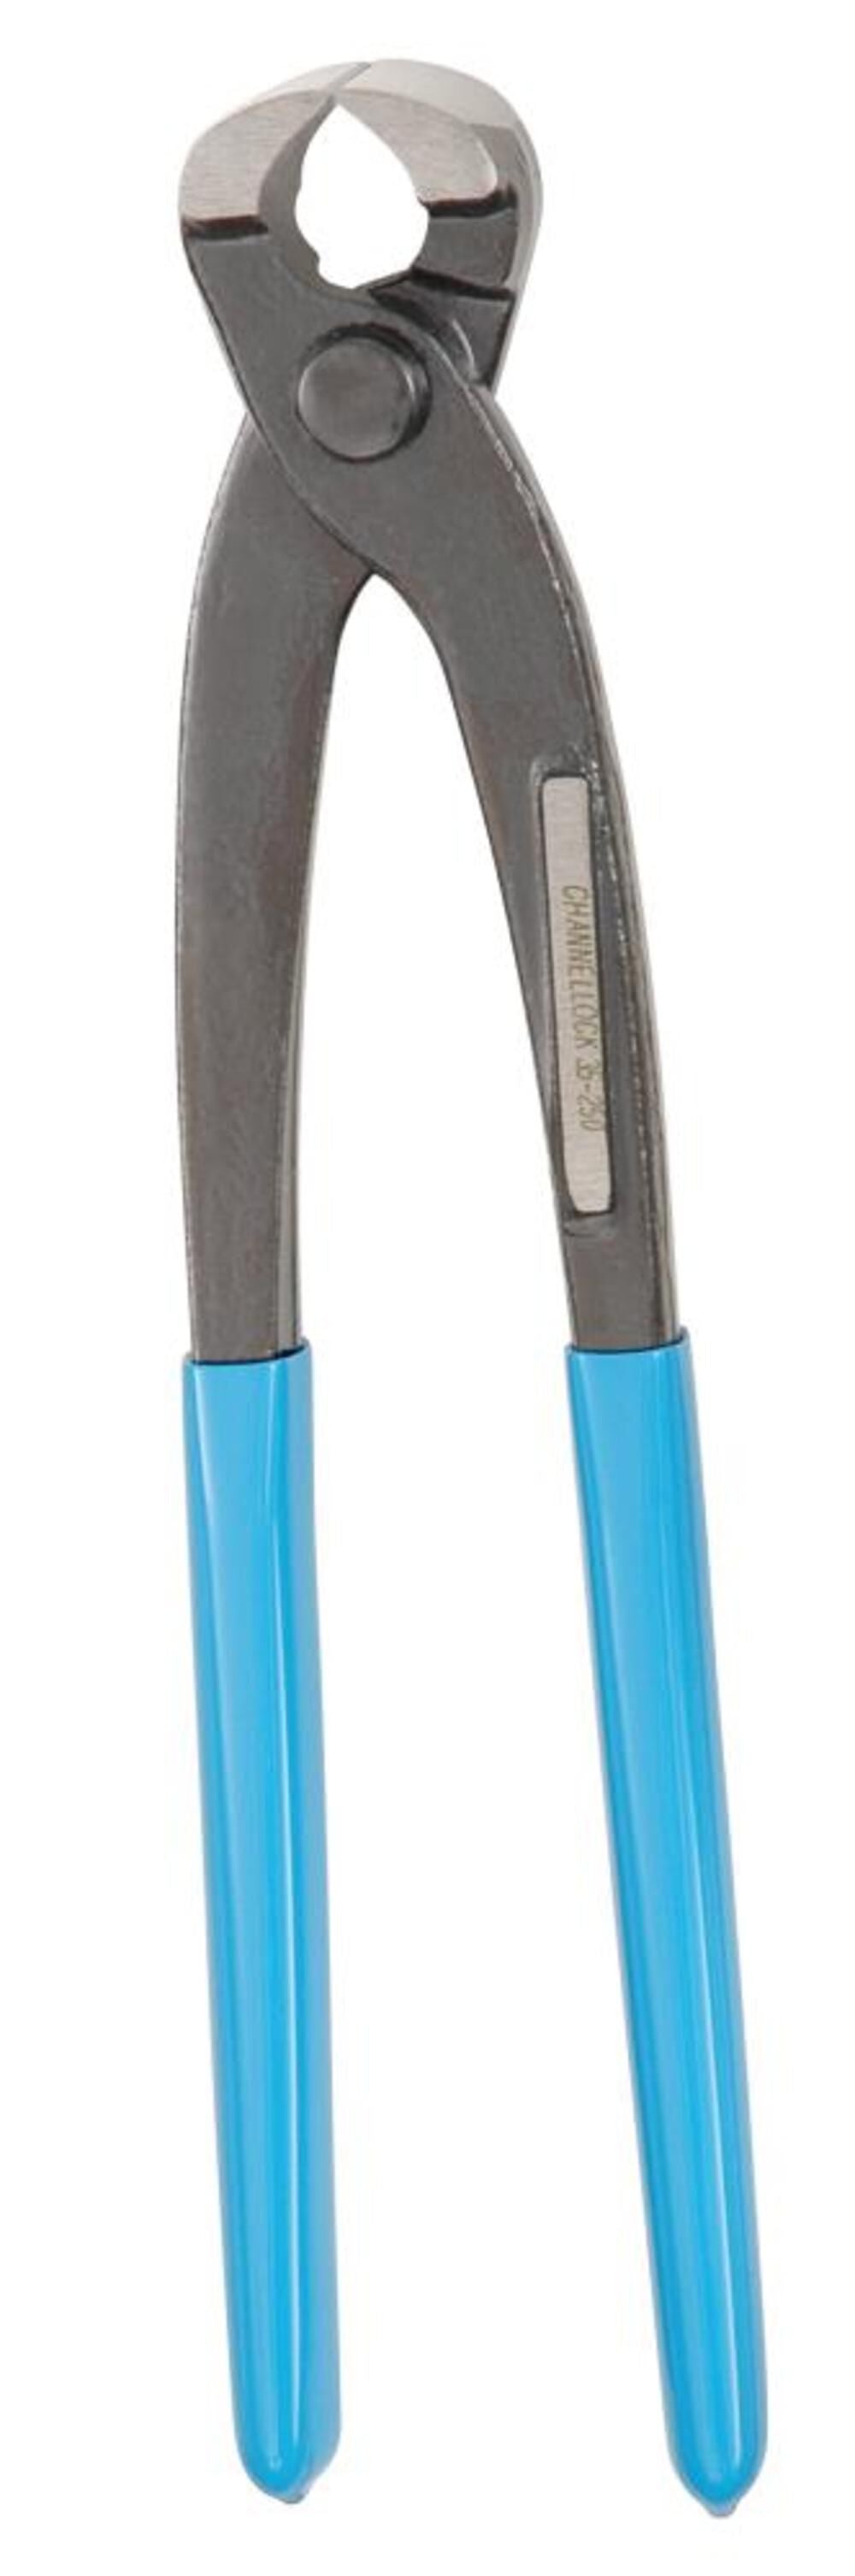 10 In. Concrete Nipper with Grips 35-250